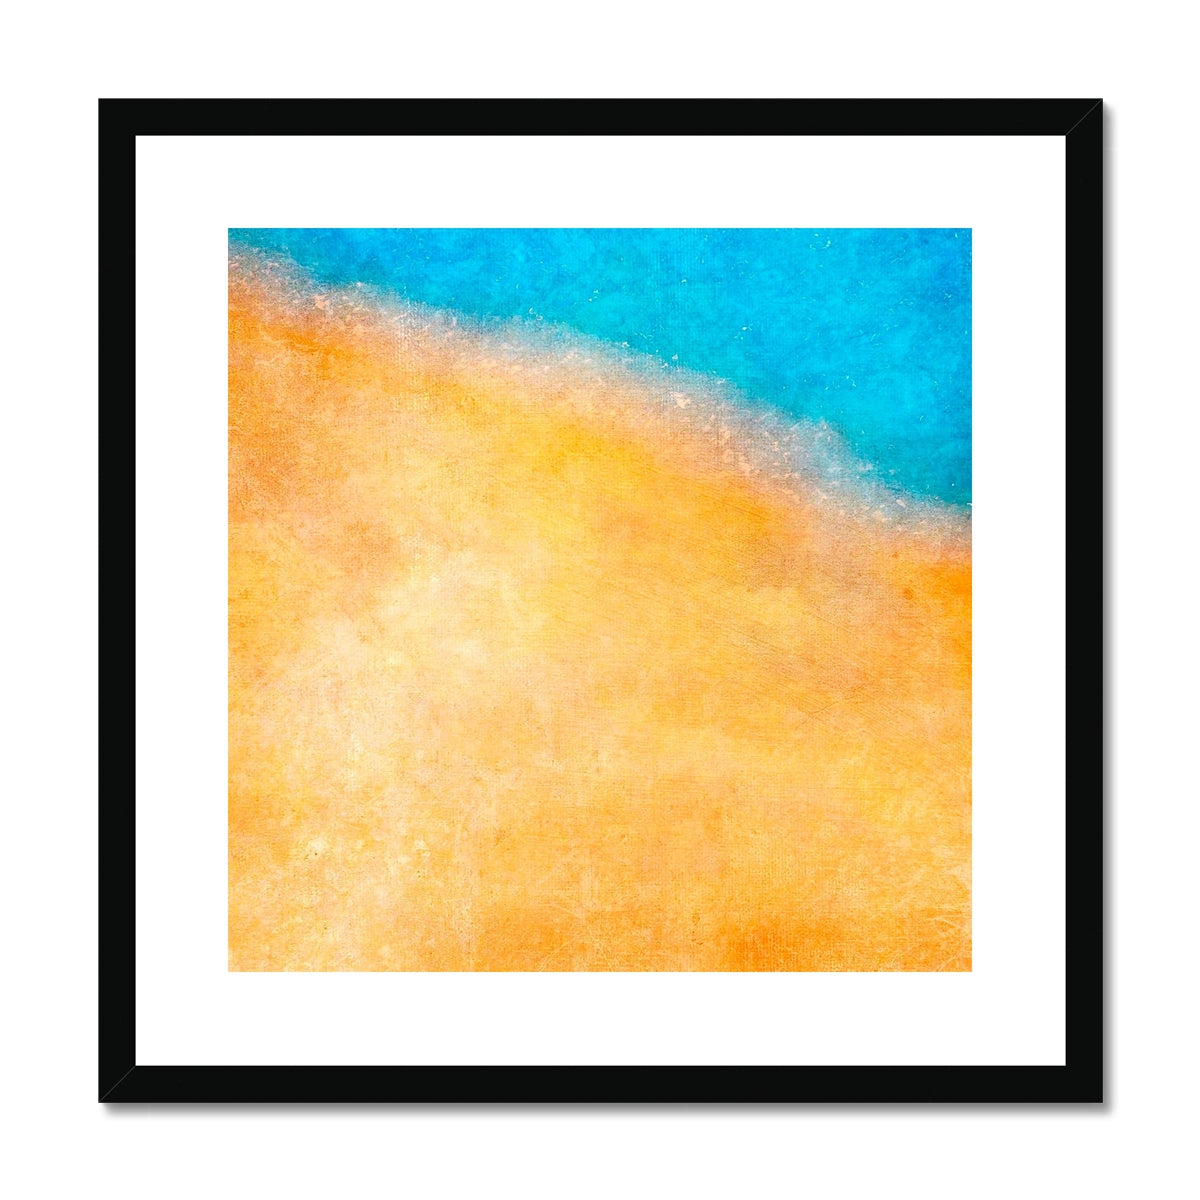 The Shoreline Abstract Painting | Framed & Mounted Prints From Scotland-Framed & Mounted Prints-Abstract & Impressionistic Art Gallery-20"x20"-Black Frame-Paintings, Prints, Homeware, Art Gifts From Scotland By Scottish Artist Kevin Hunter